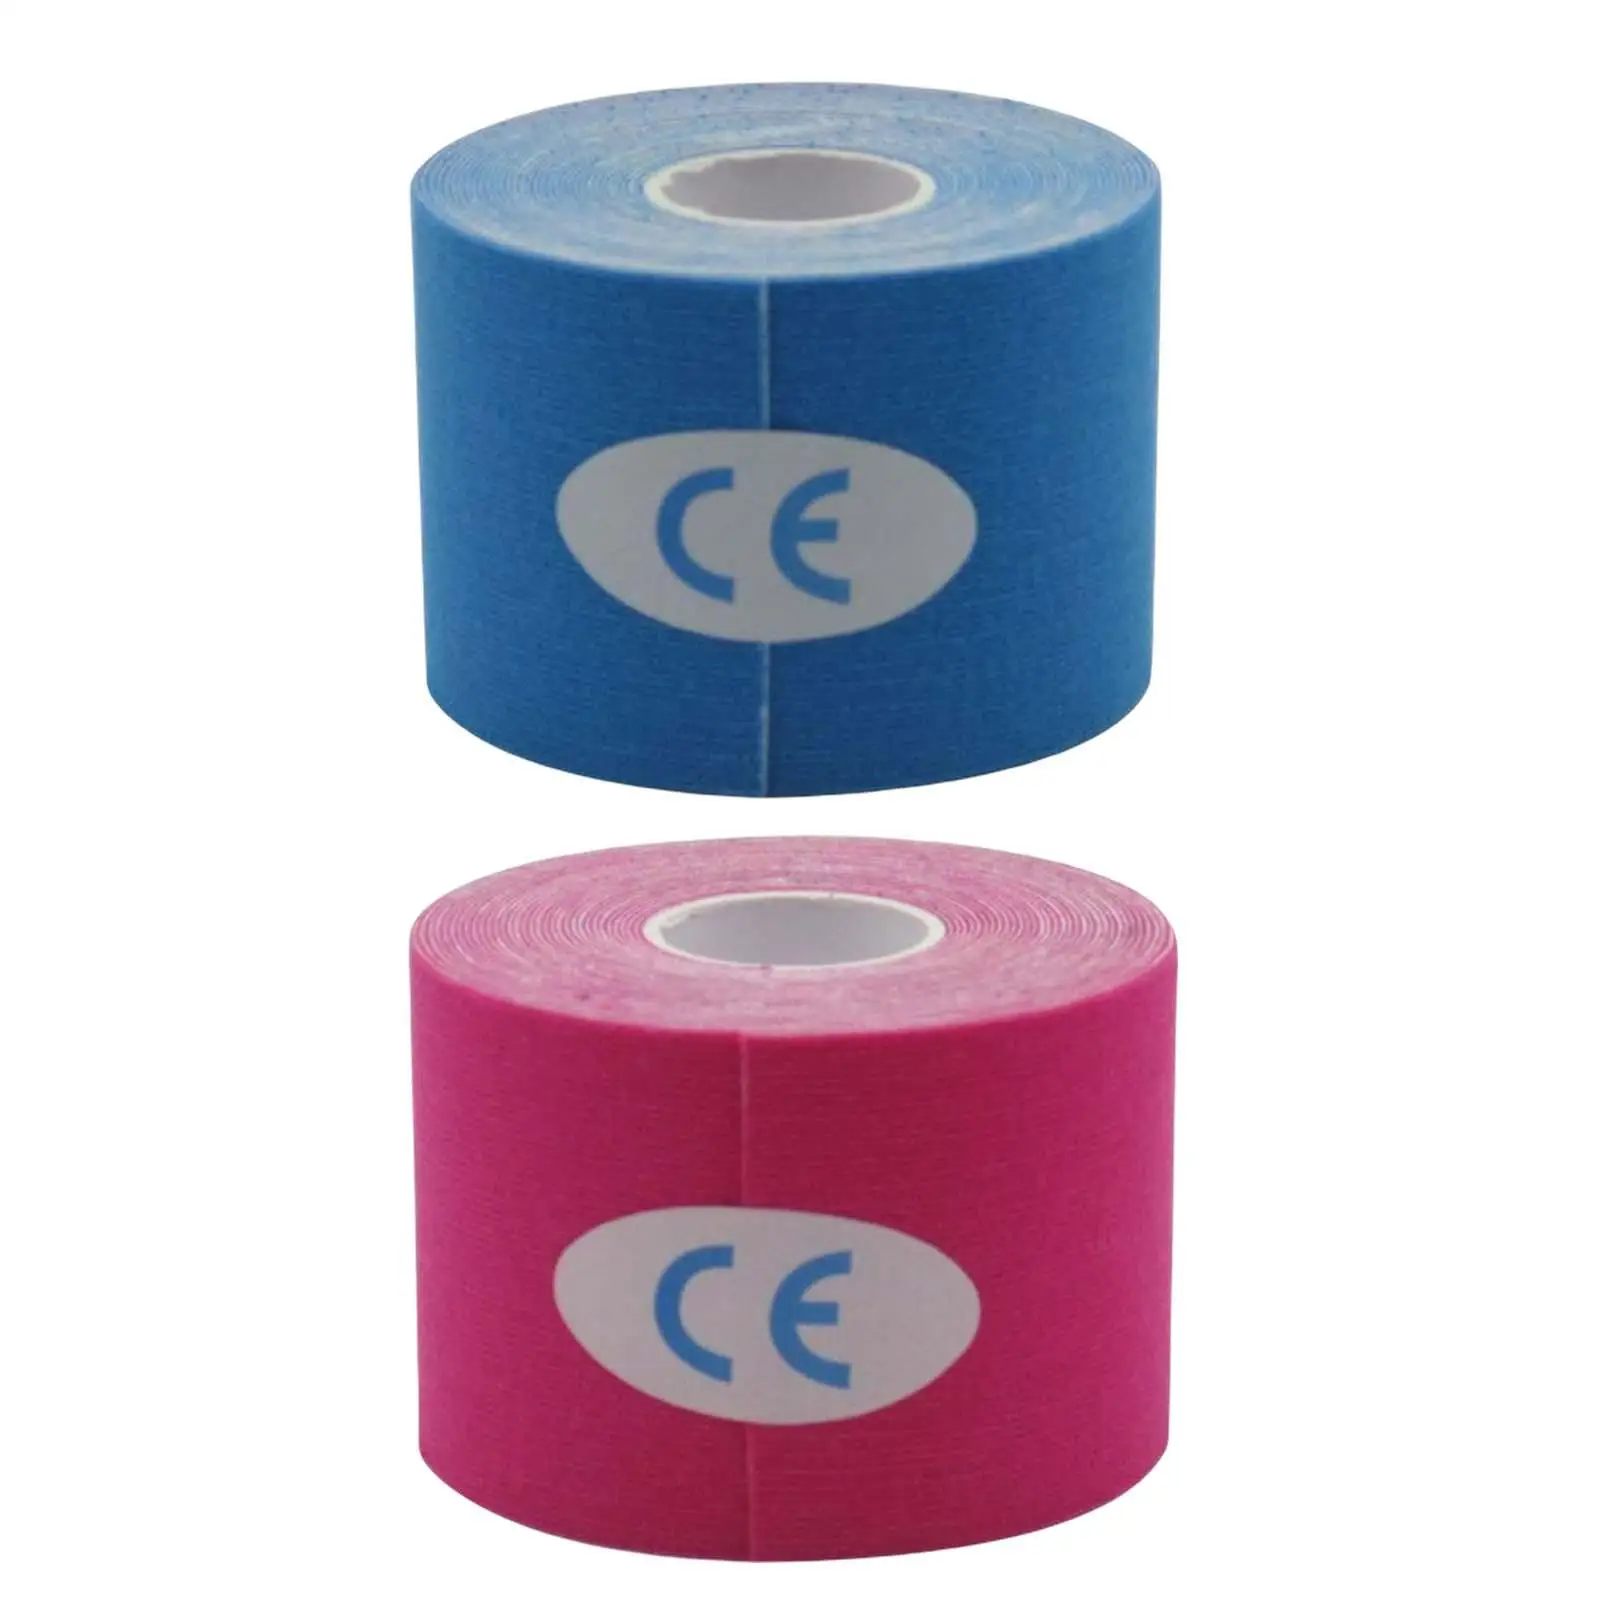 5M Roll Tape for Sports Muscle Tape Water Resistant Elastic Breathable Athletic